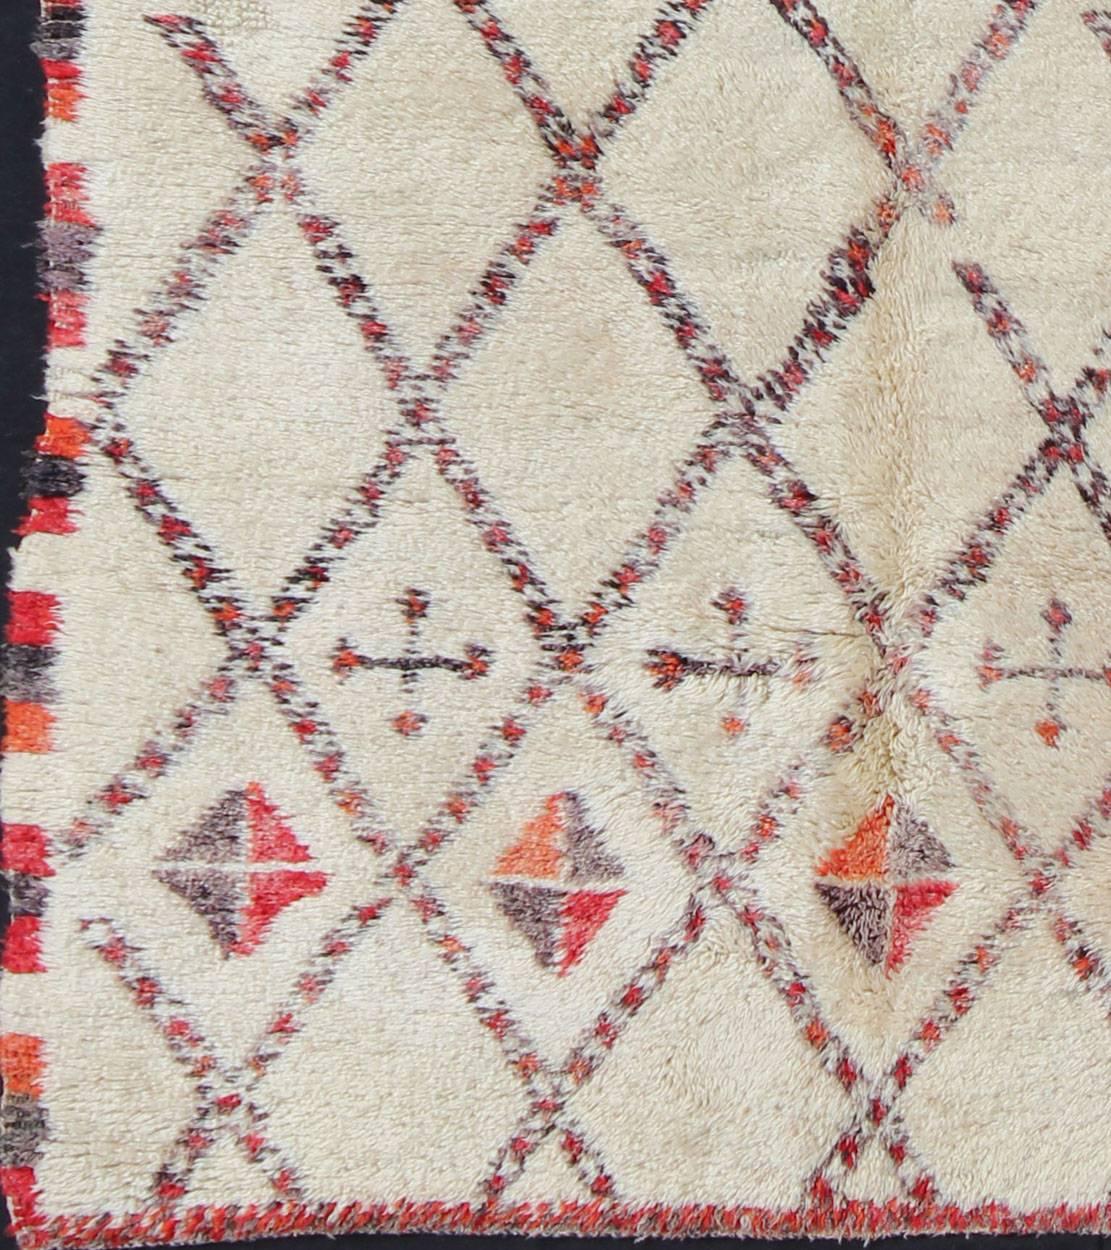 Measures: 6'5'' x 11'7''.
Woven in light, creamy, hand-spun wool with muted red, gray and light charcoal symbols, this gorgeous Moroccan rug has a sophisticated lozenge-based grid design that encompasses the entirety of the carpet. The eight-pointed